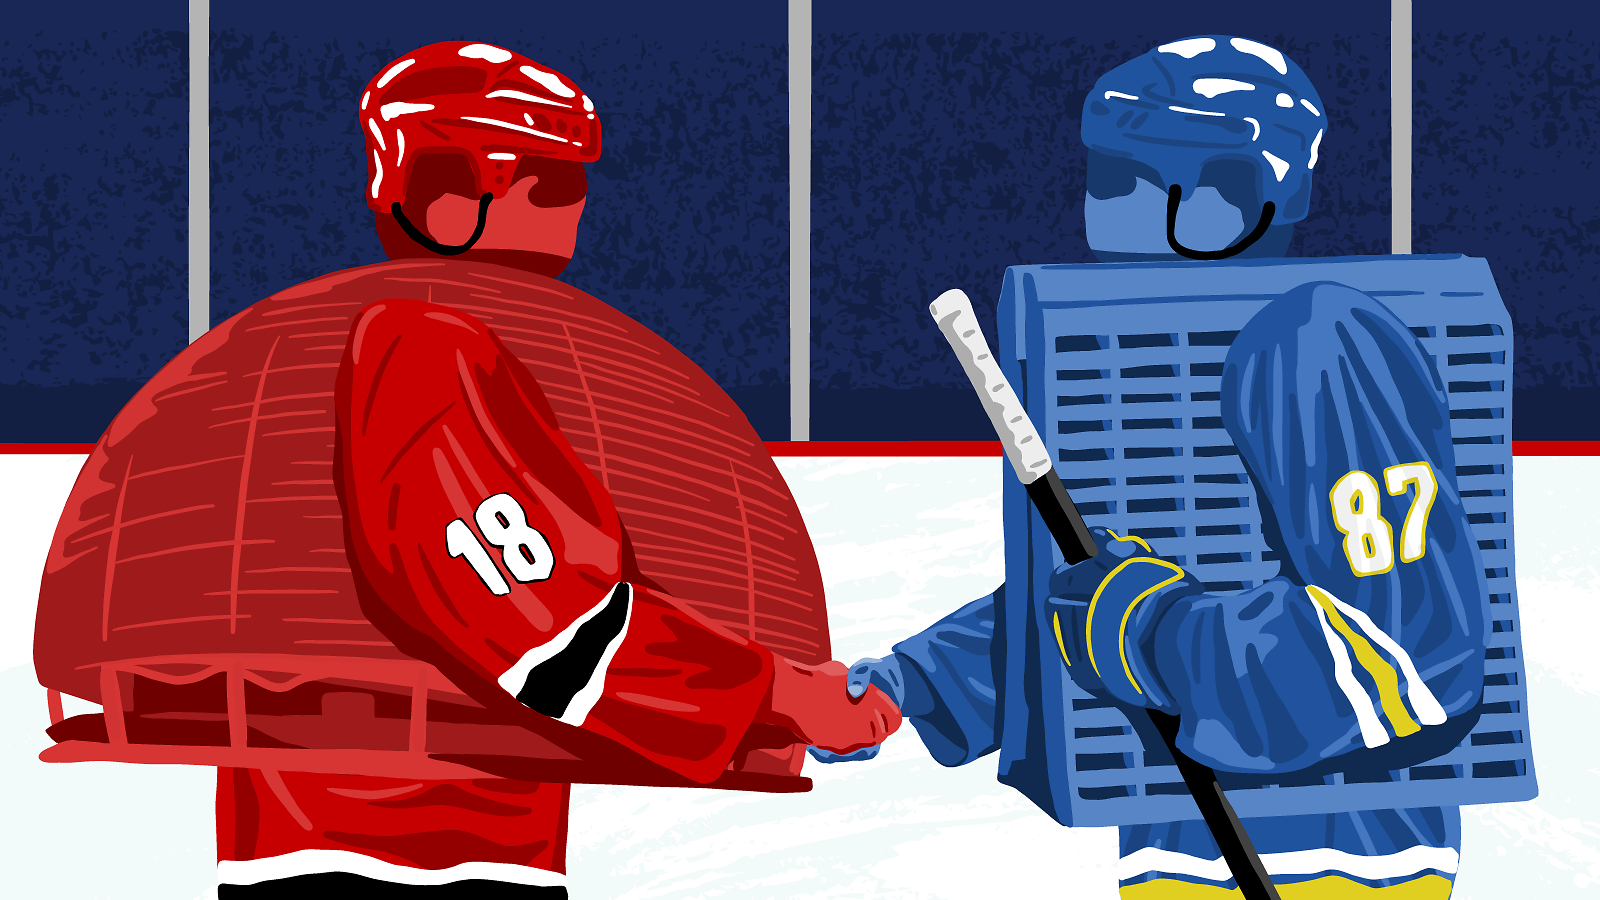 Illustration: Wilson Hall and the CERN globe building are hockey players shaking hands